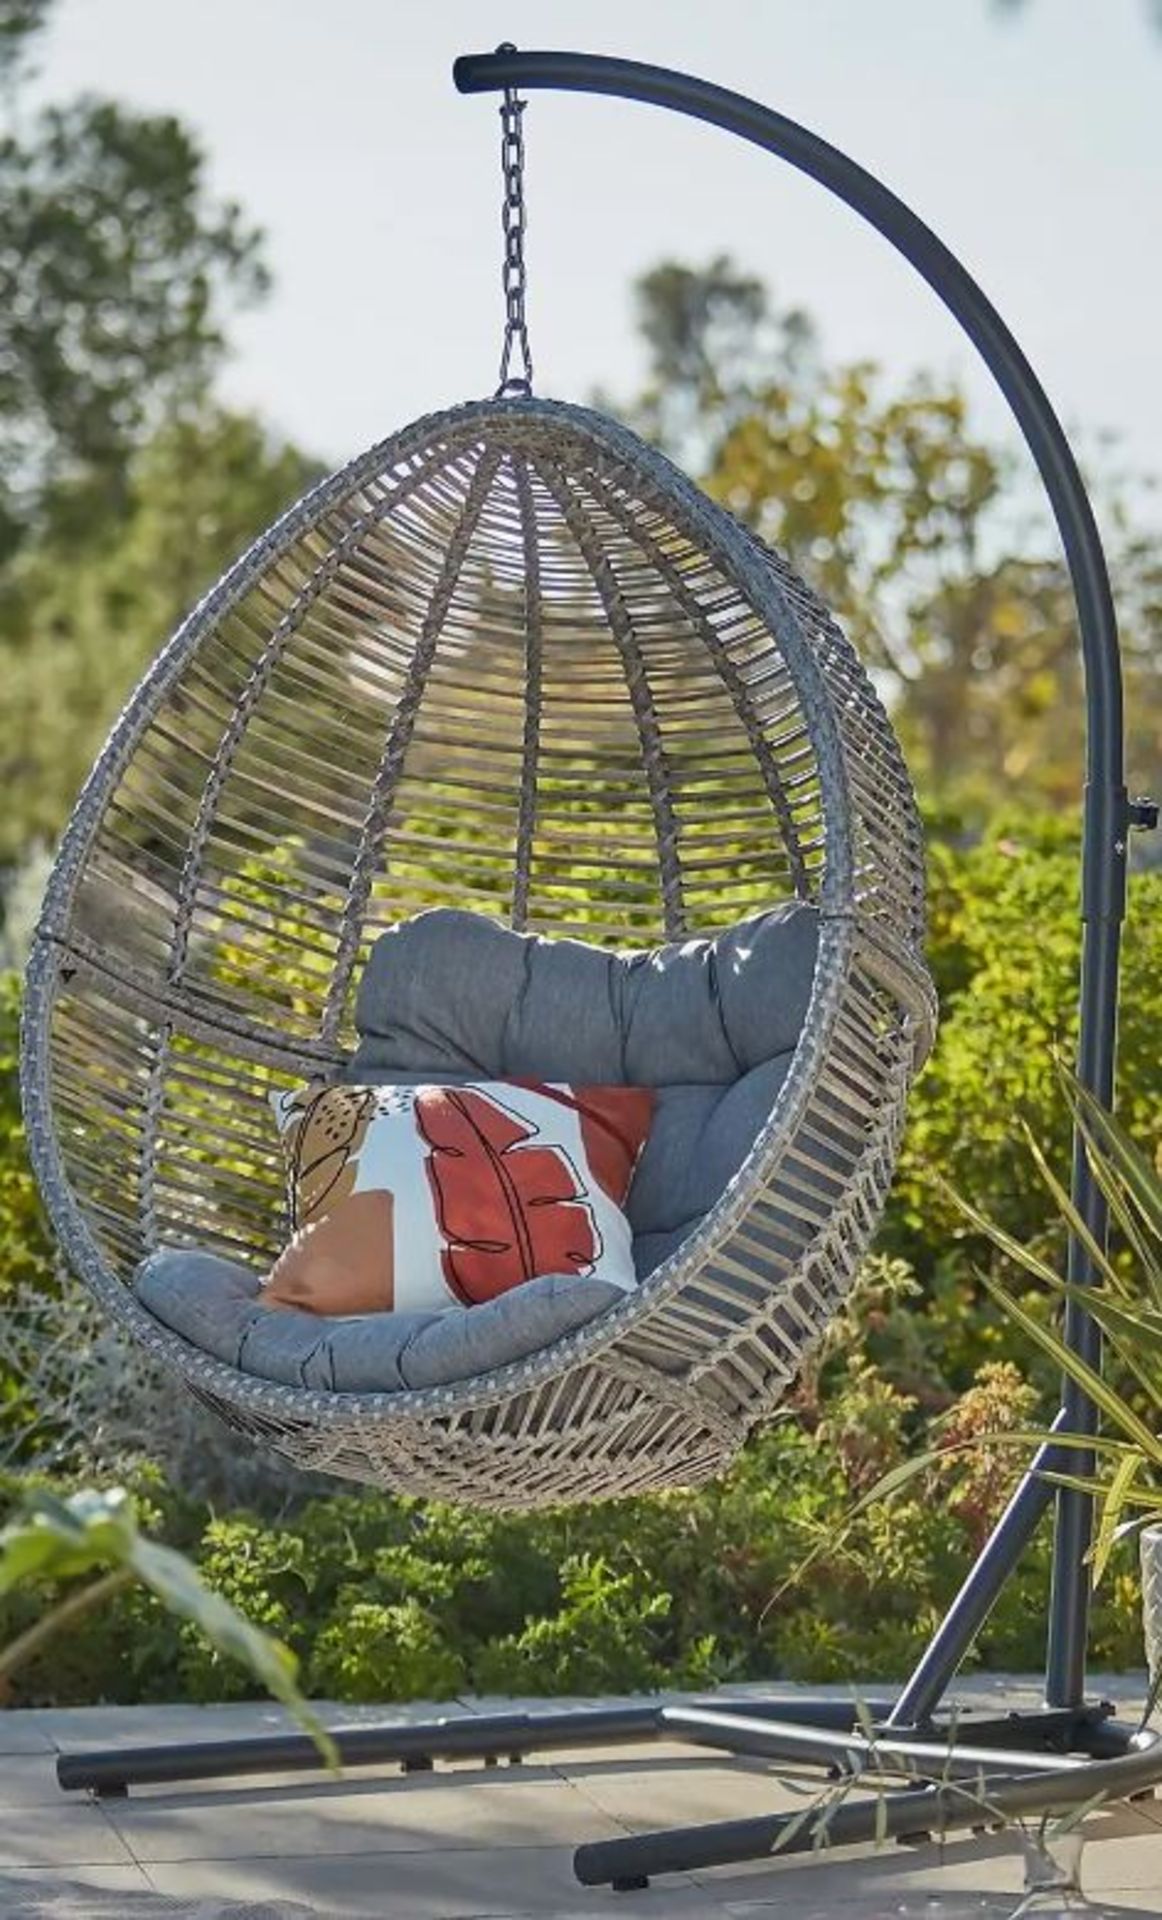 (R16) 1x Hartington Florence Collection Hanging Chair RRP £350